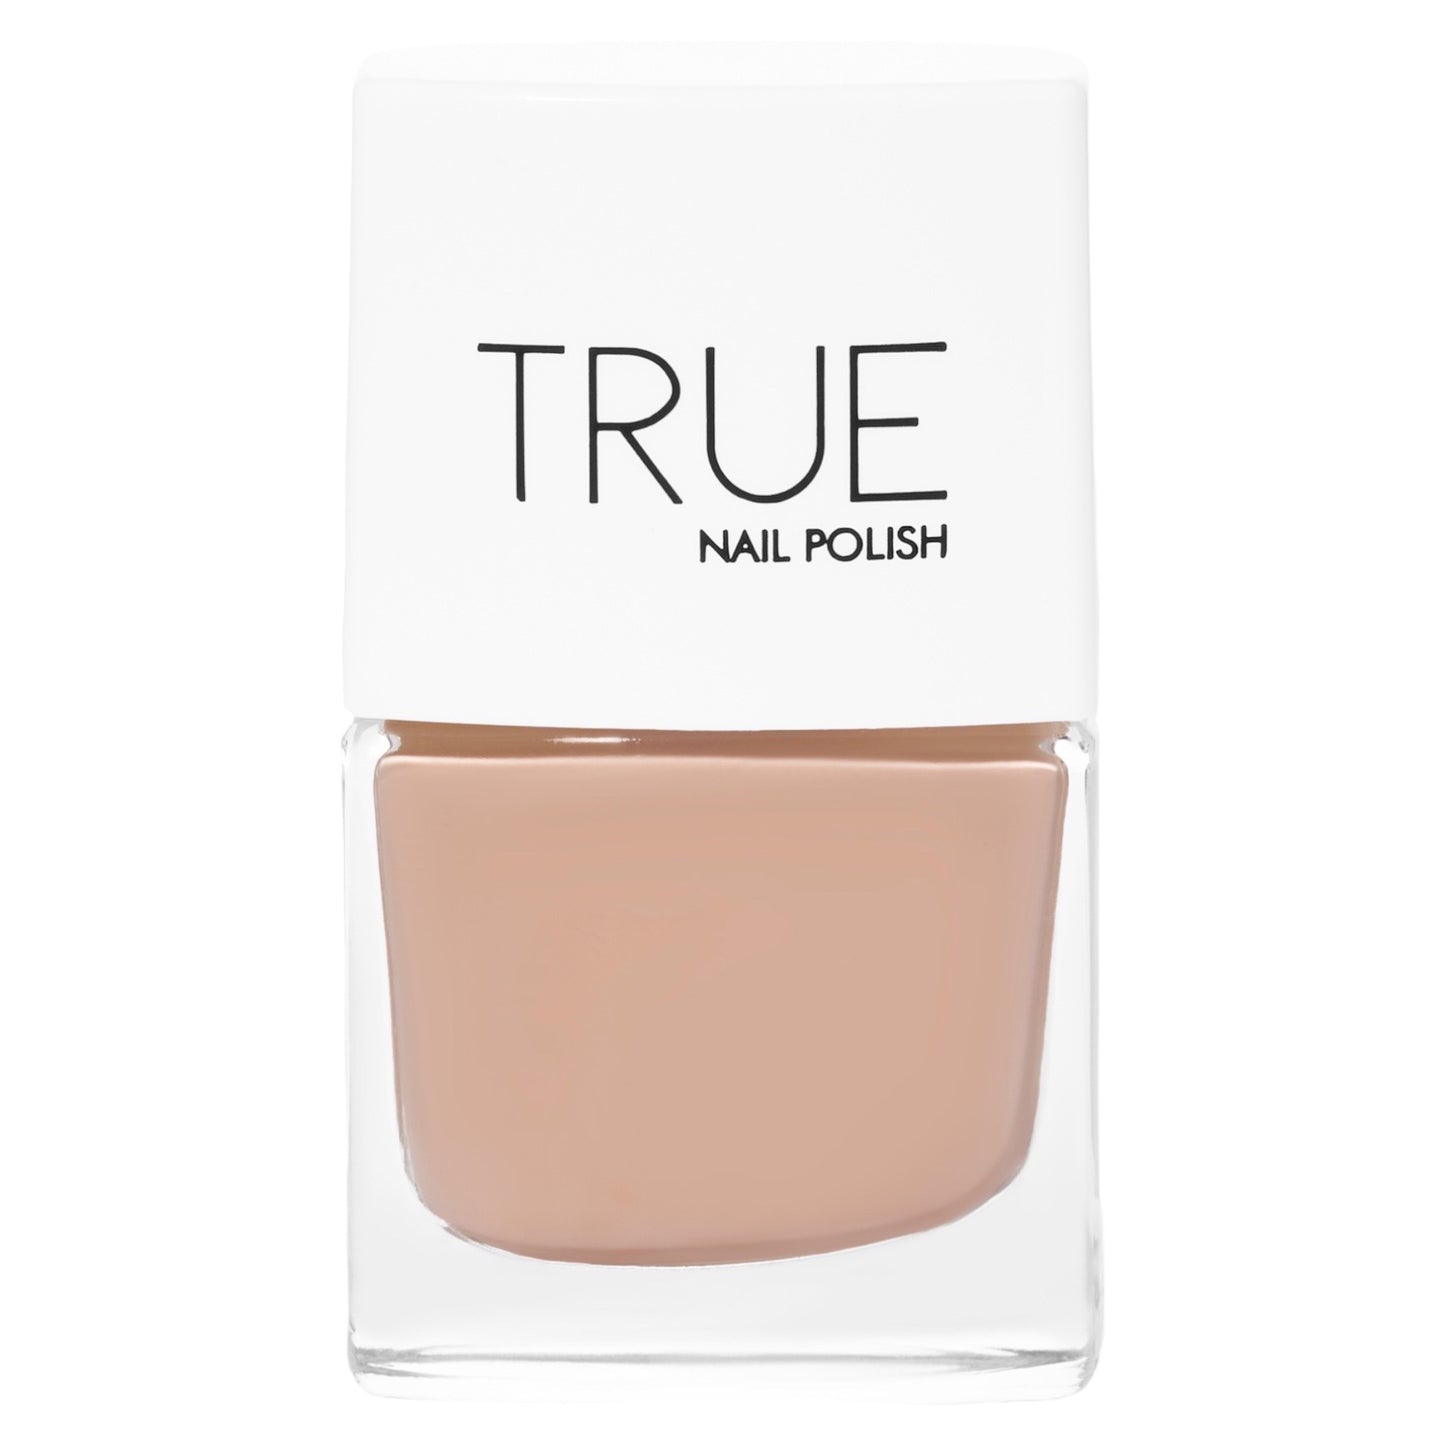 A bottle of Sentimental, a pale nude  shade from True Nail Polish